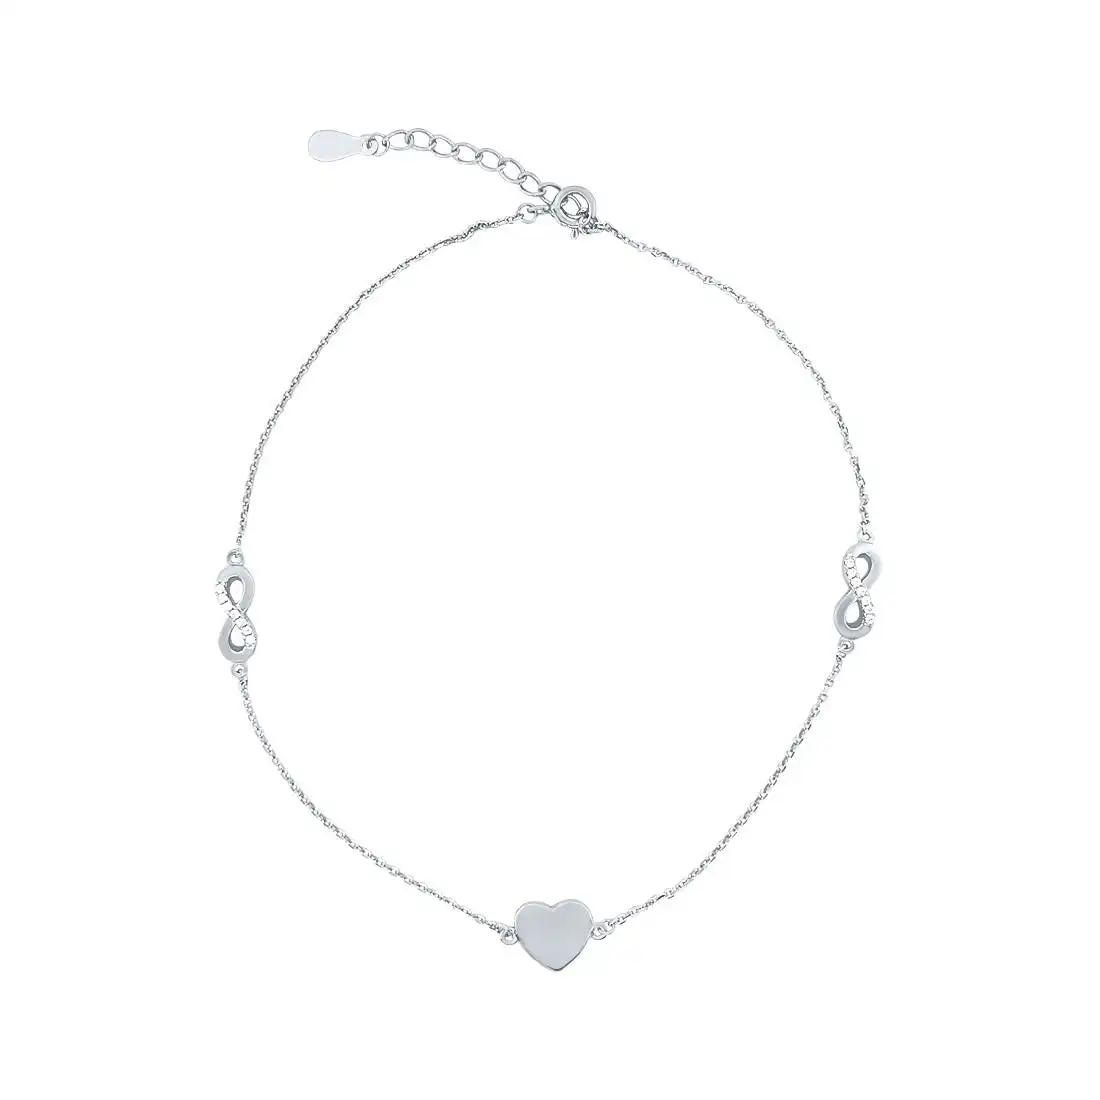 25cm Heart & Infinity Anklet in Sterling Silver